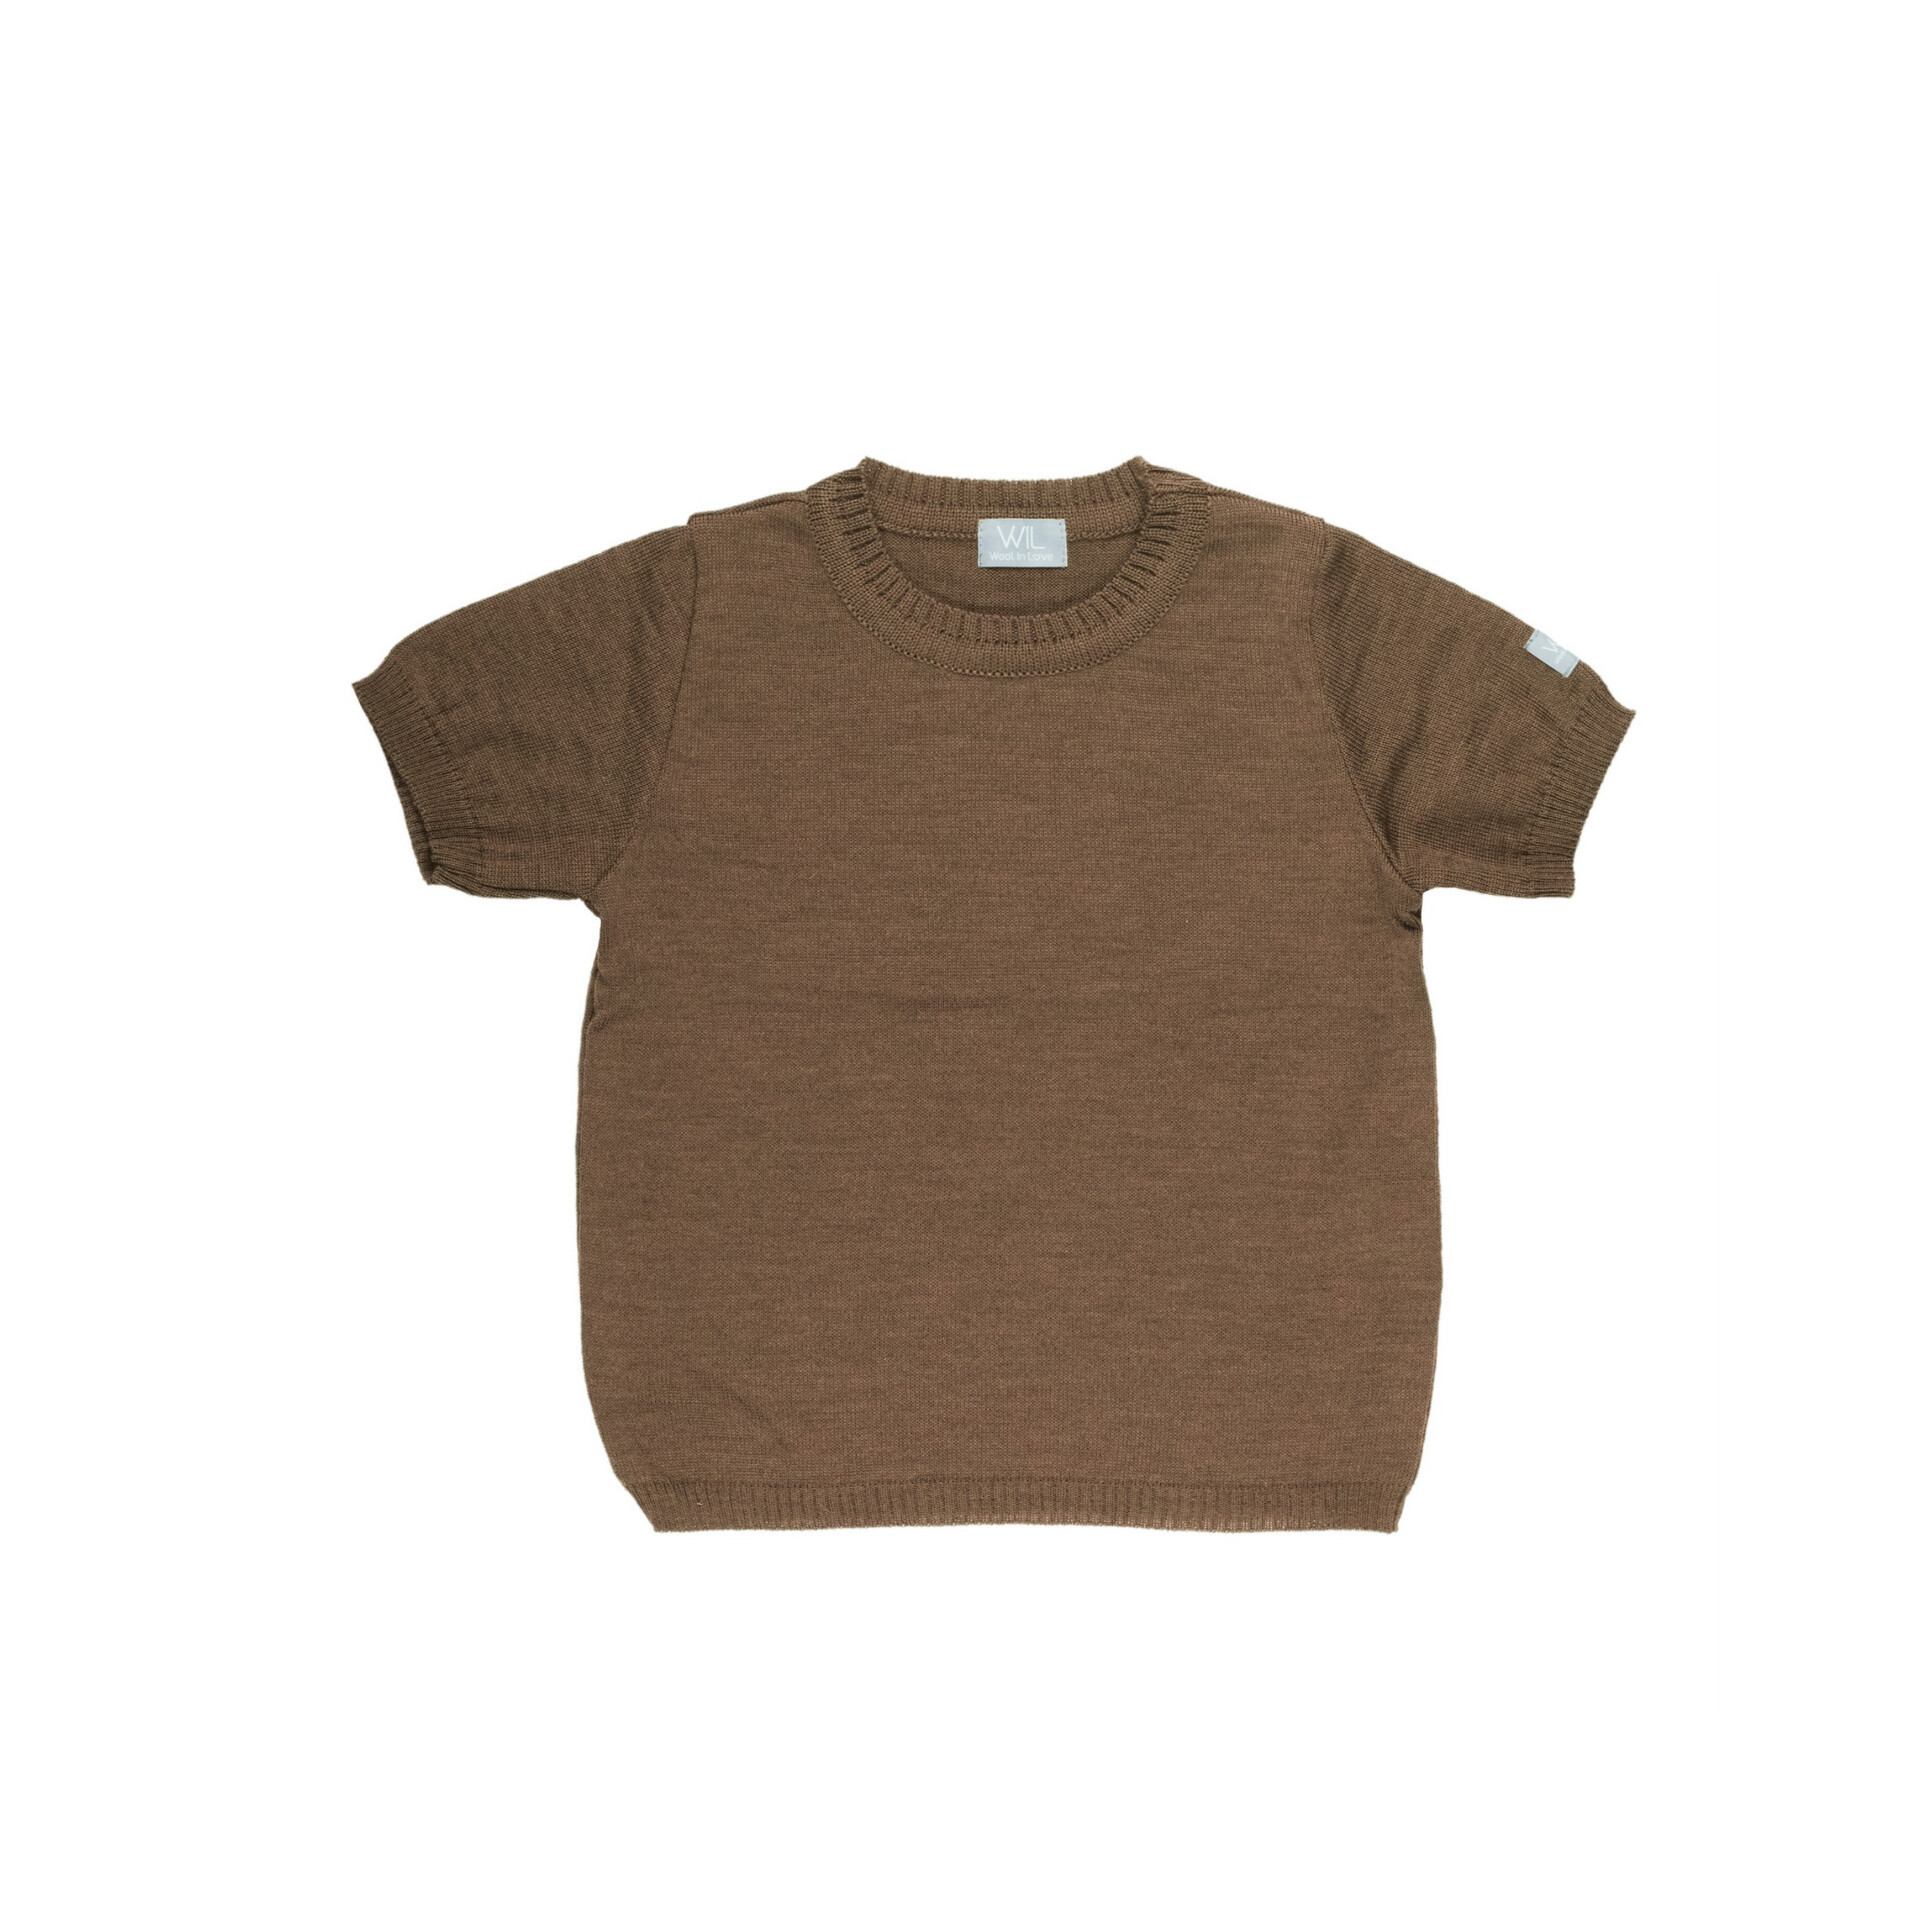 This light short sleeve sweater is perfect to wear as a t-shirt. 